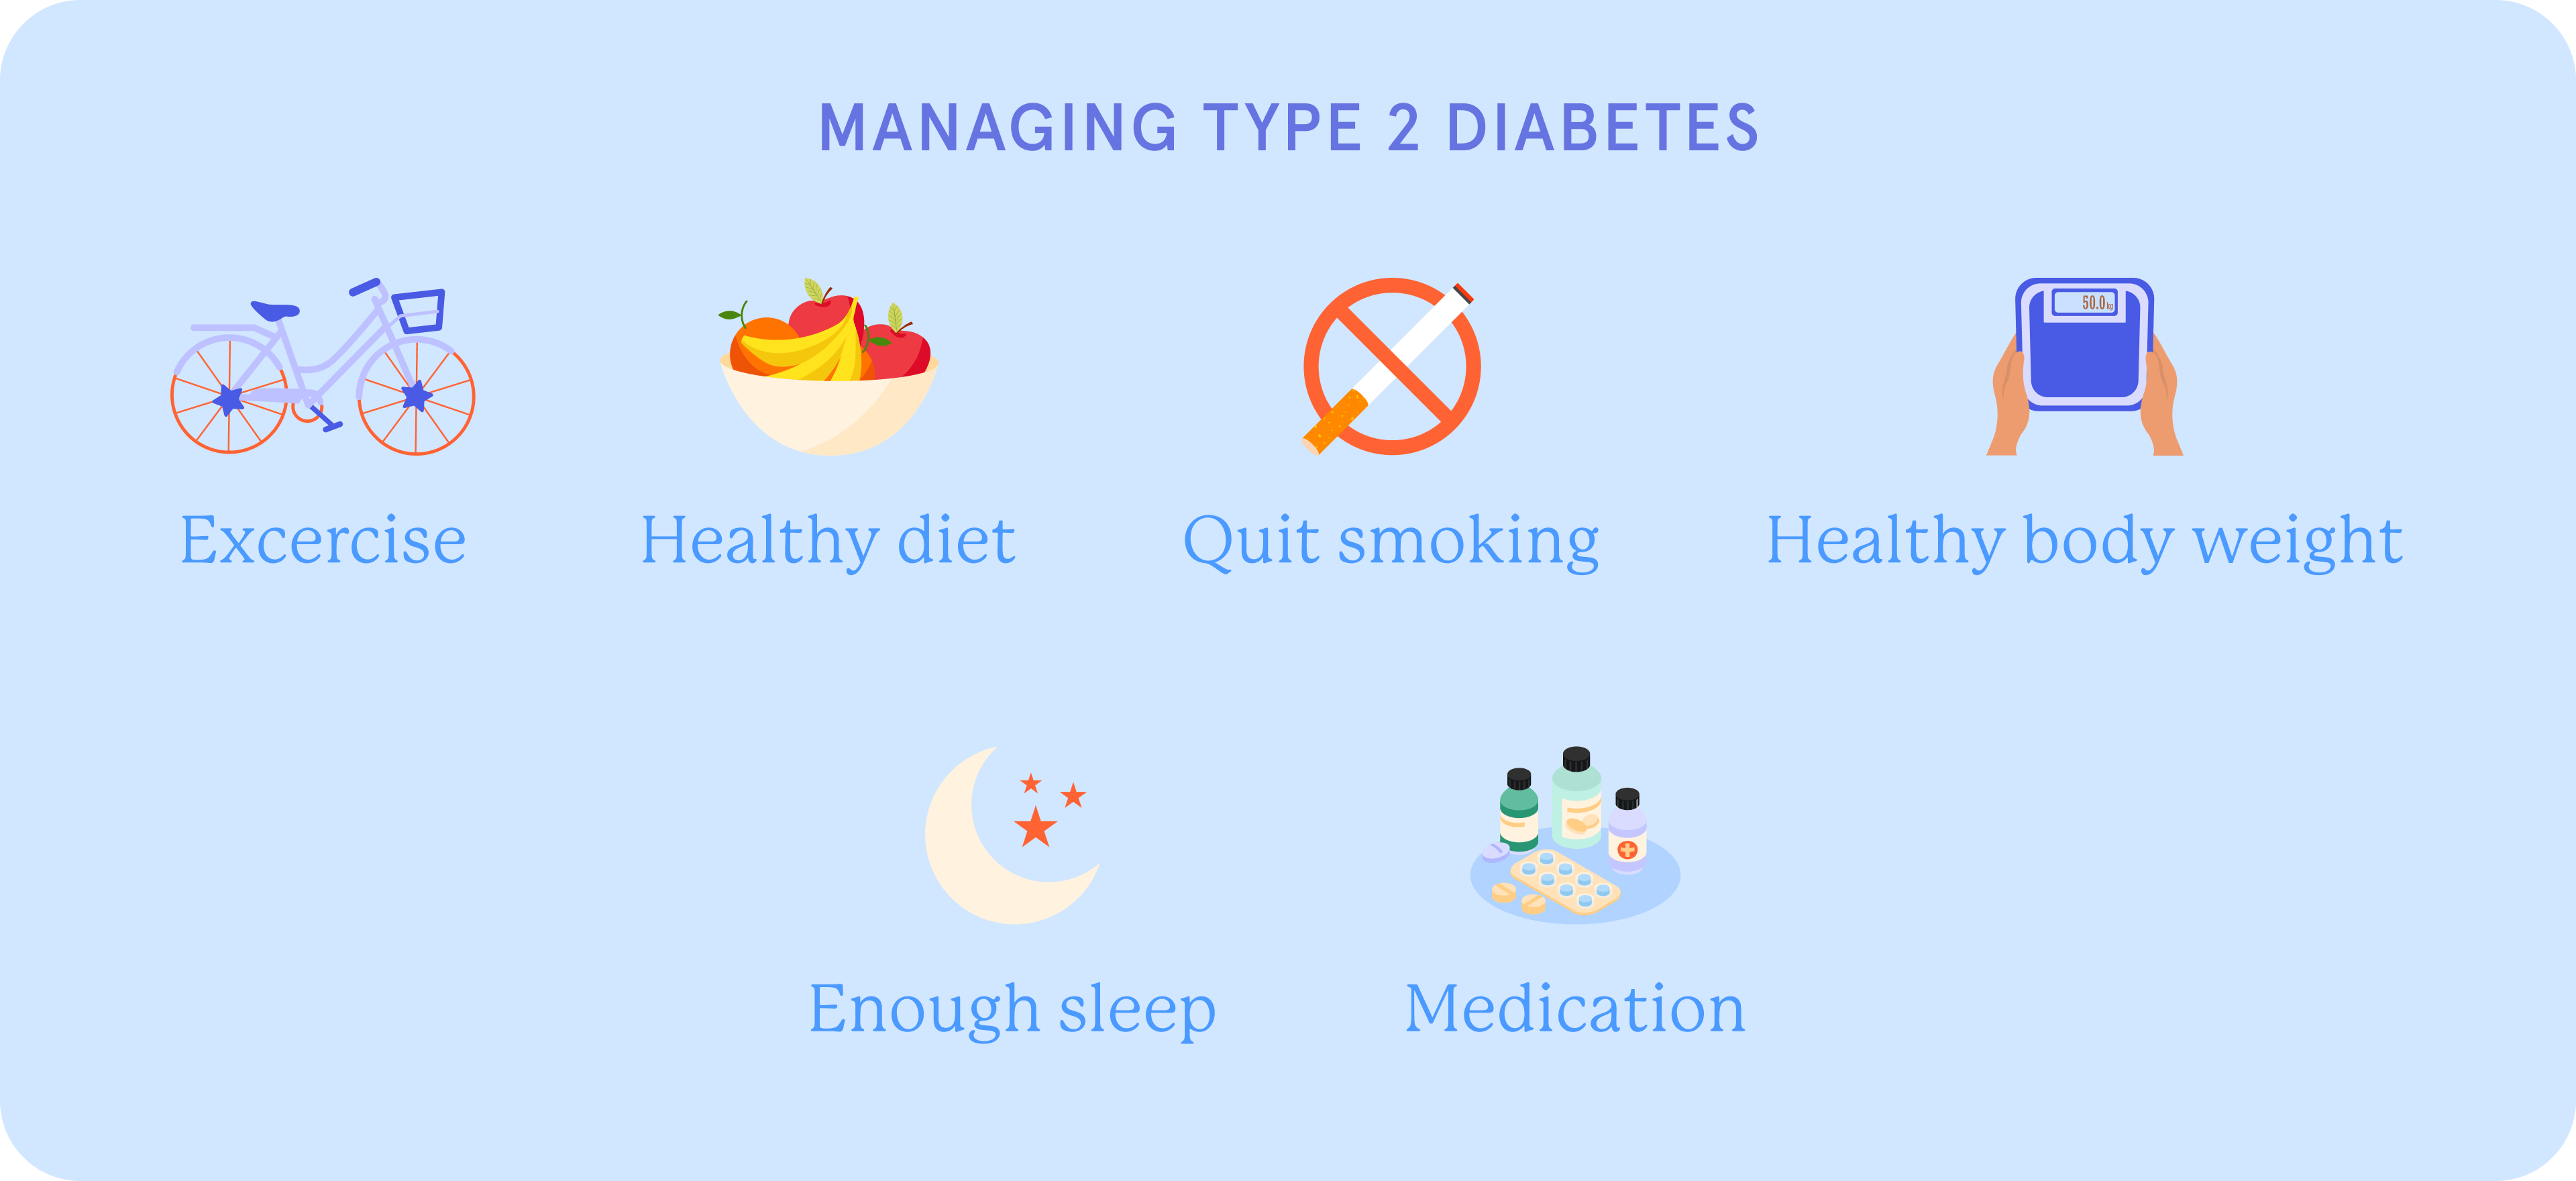 Managing type 2 diabetes with exercise, a healthy diet, enough sleep and medications.